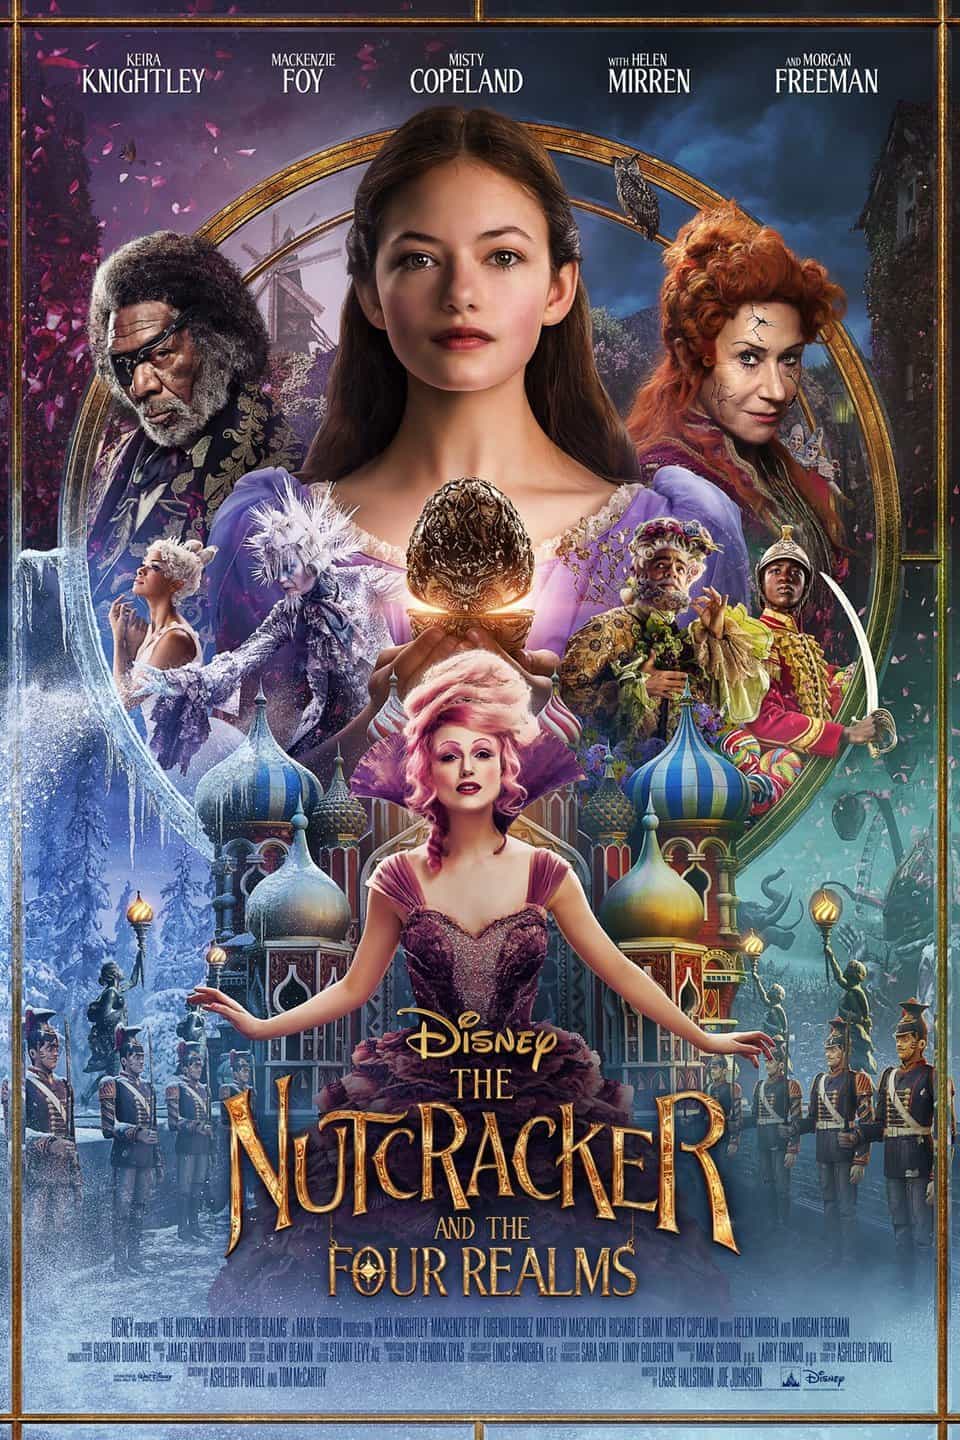 The Nutcracker And The Four Realms gets a PG rating in the UK for mild threat